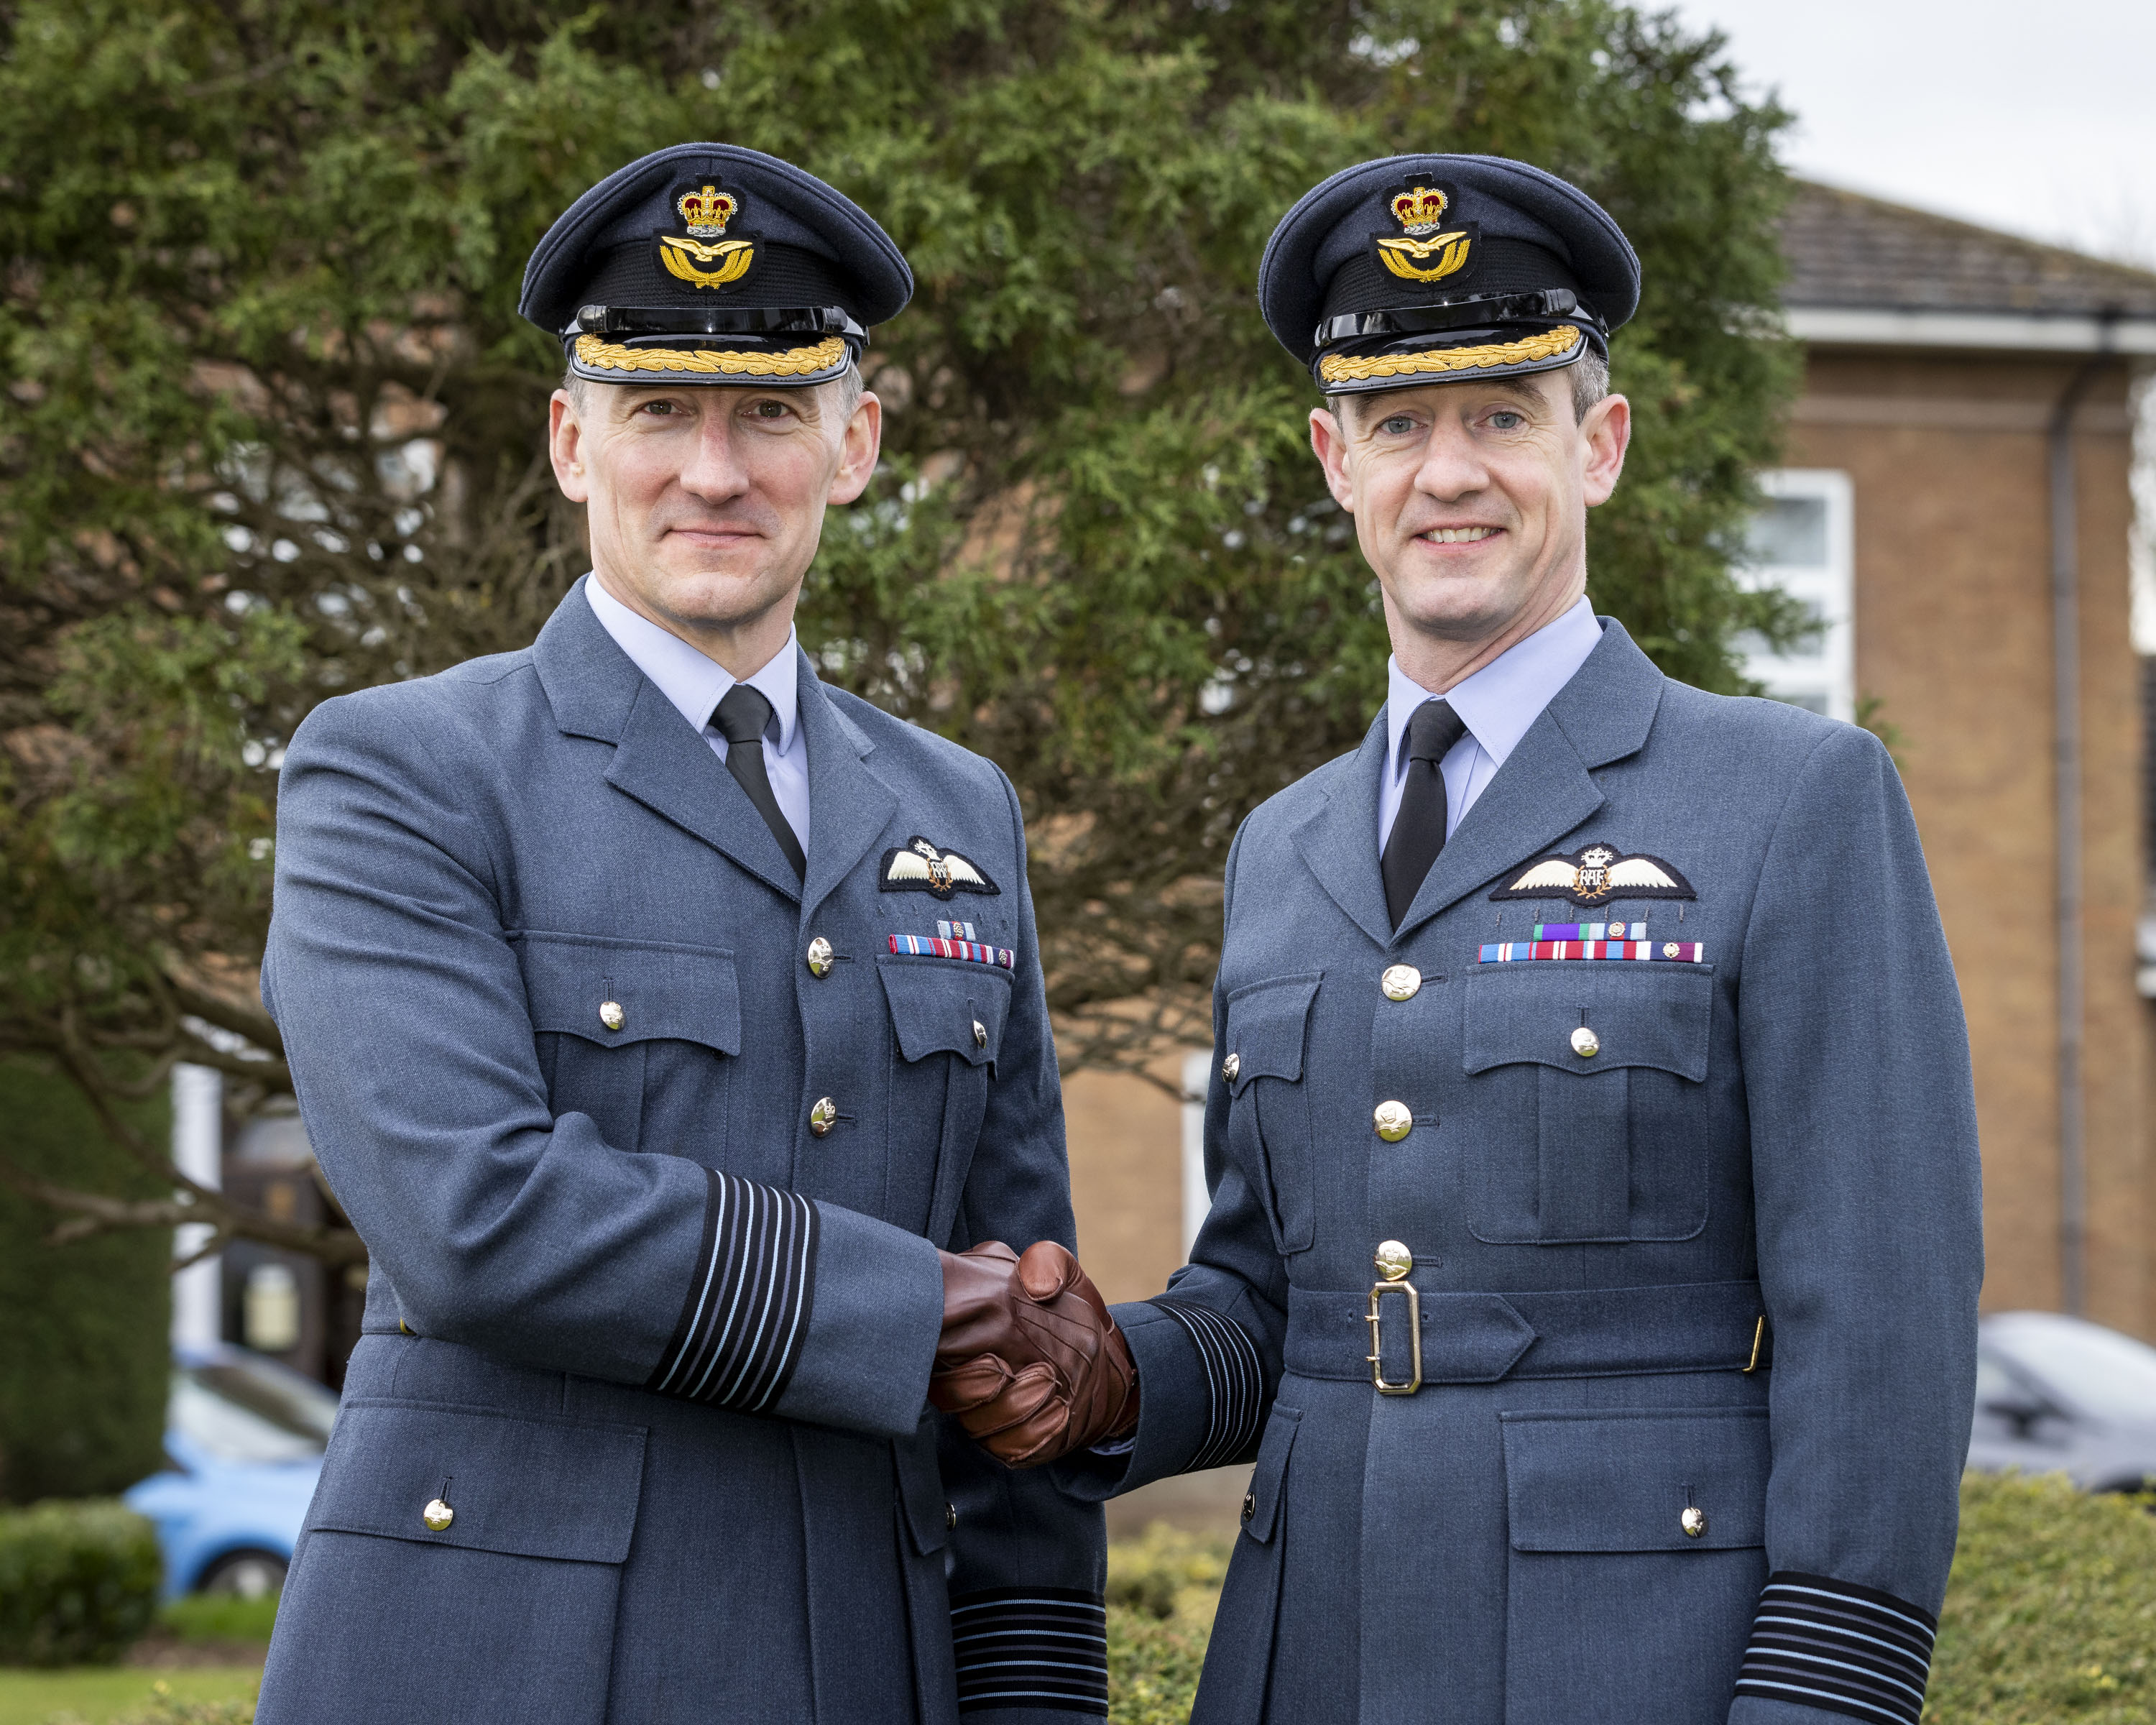 From left to right: Group Captain O’Grady and Group Captain Cooper